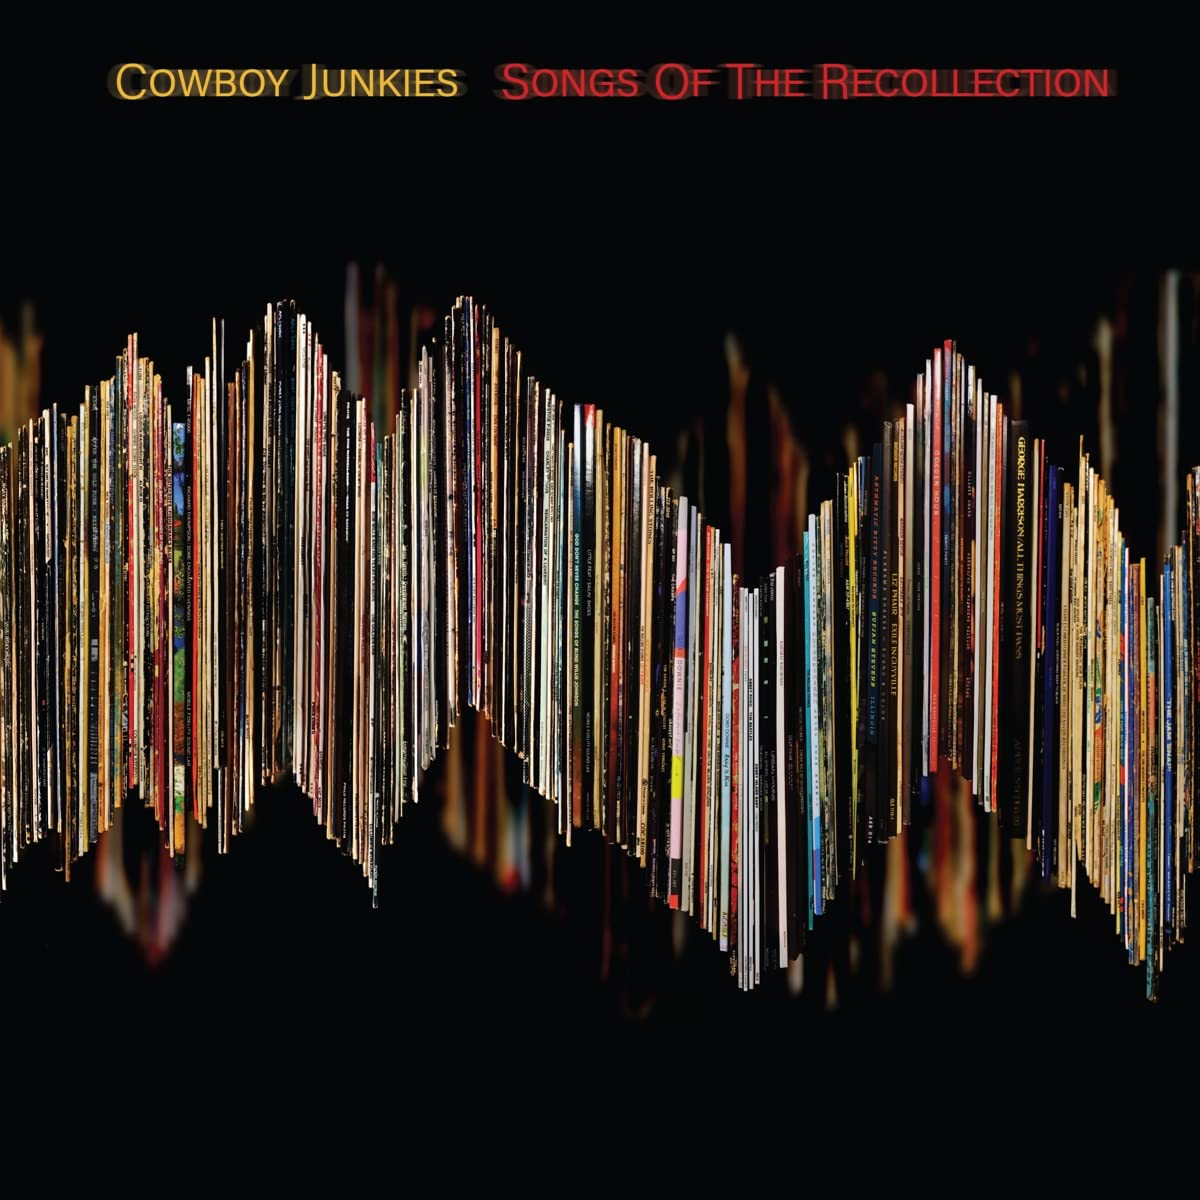 Cowboy Junkies Songs of the Recollection